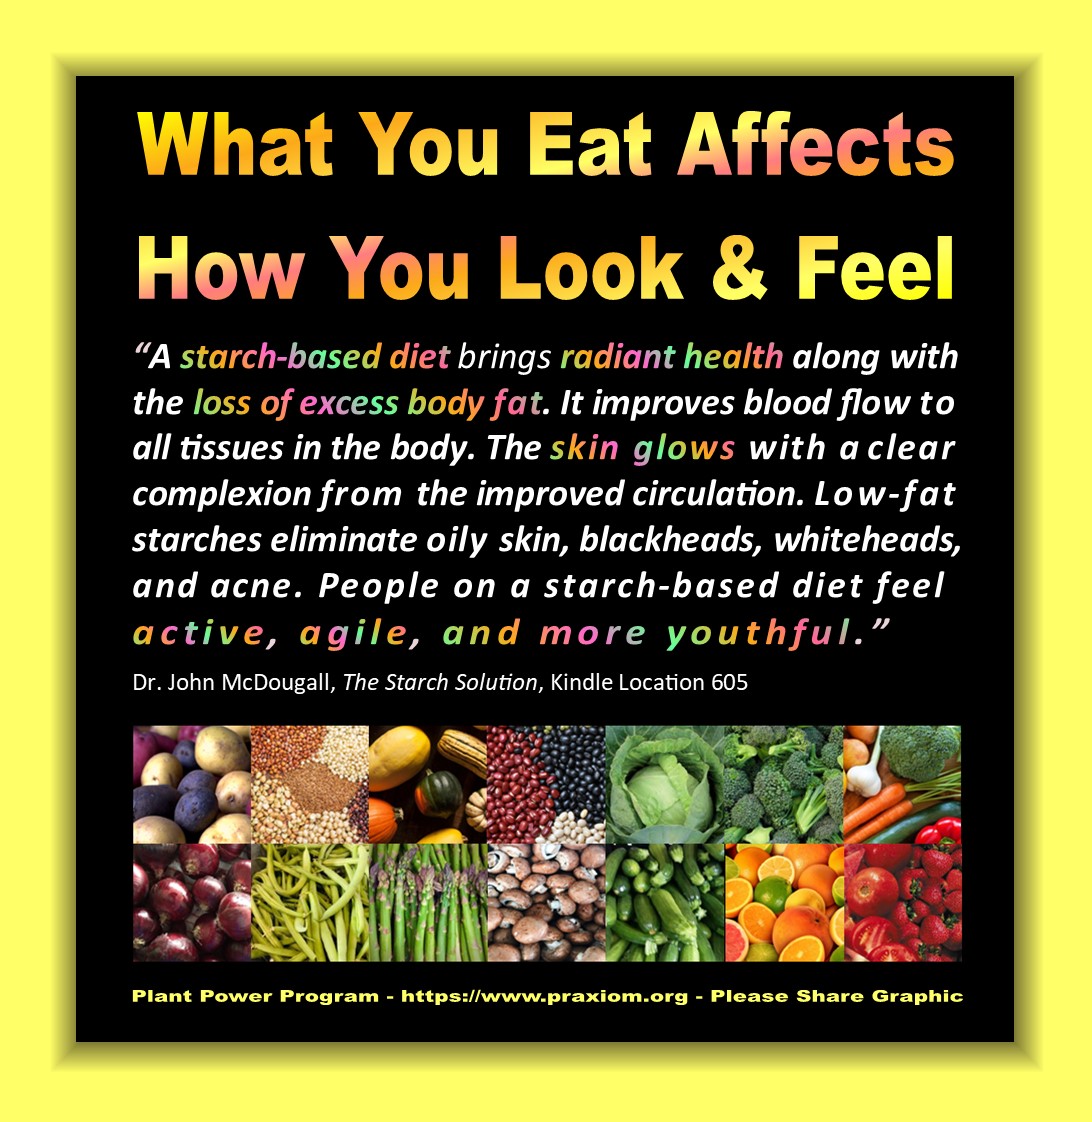 What You Eat Affects How You Look - Dr. John McDougall